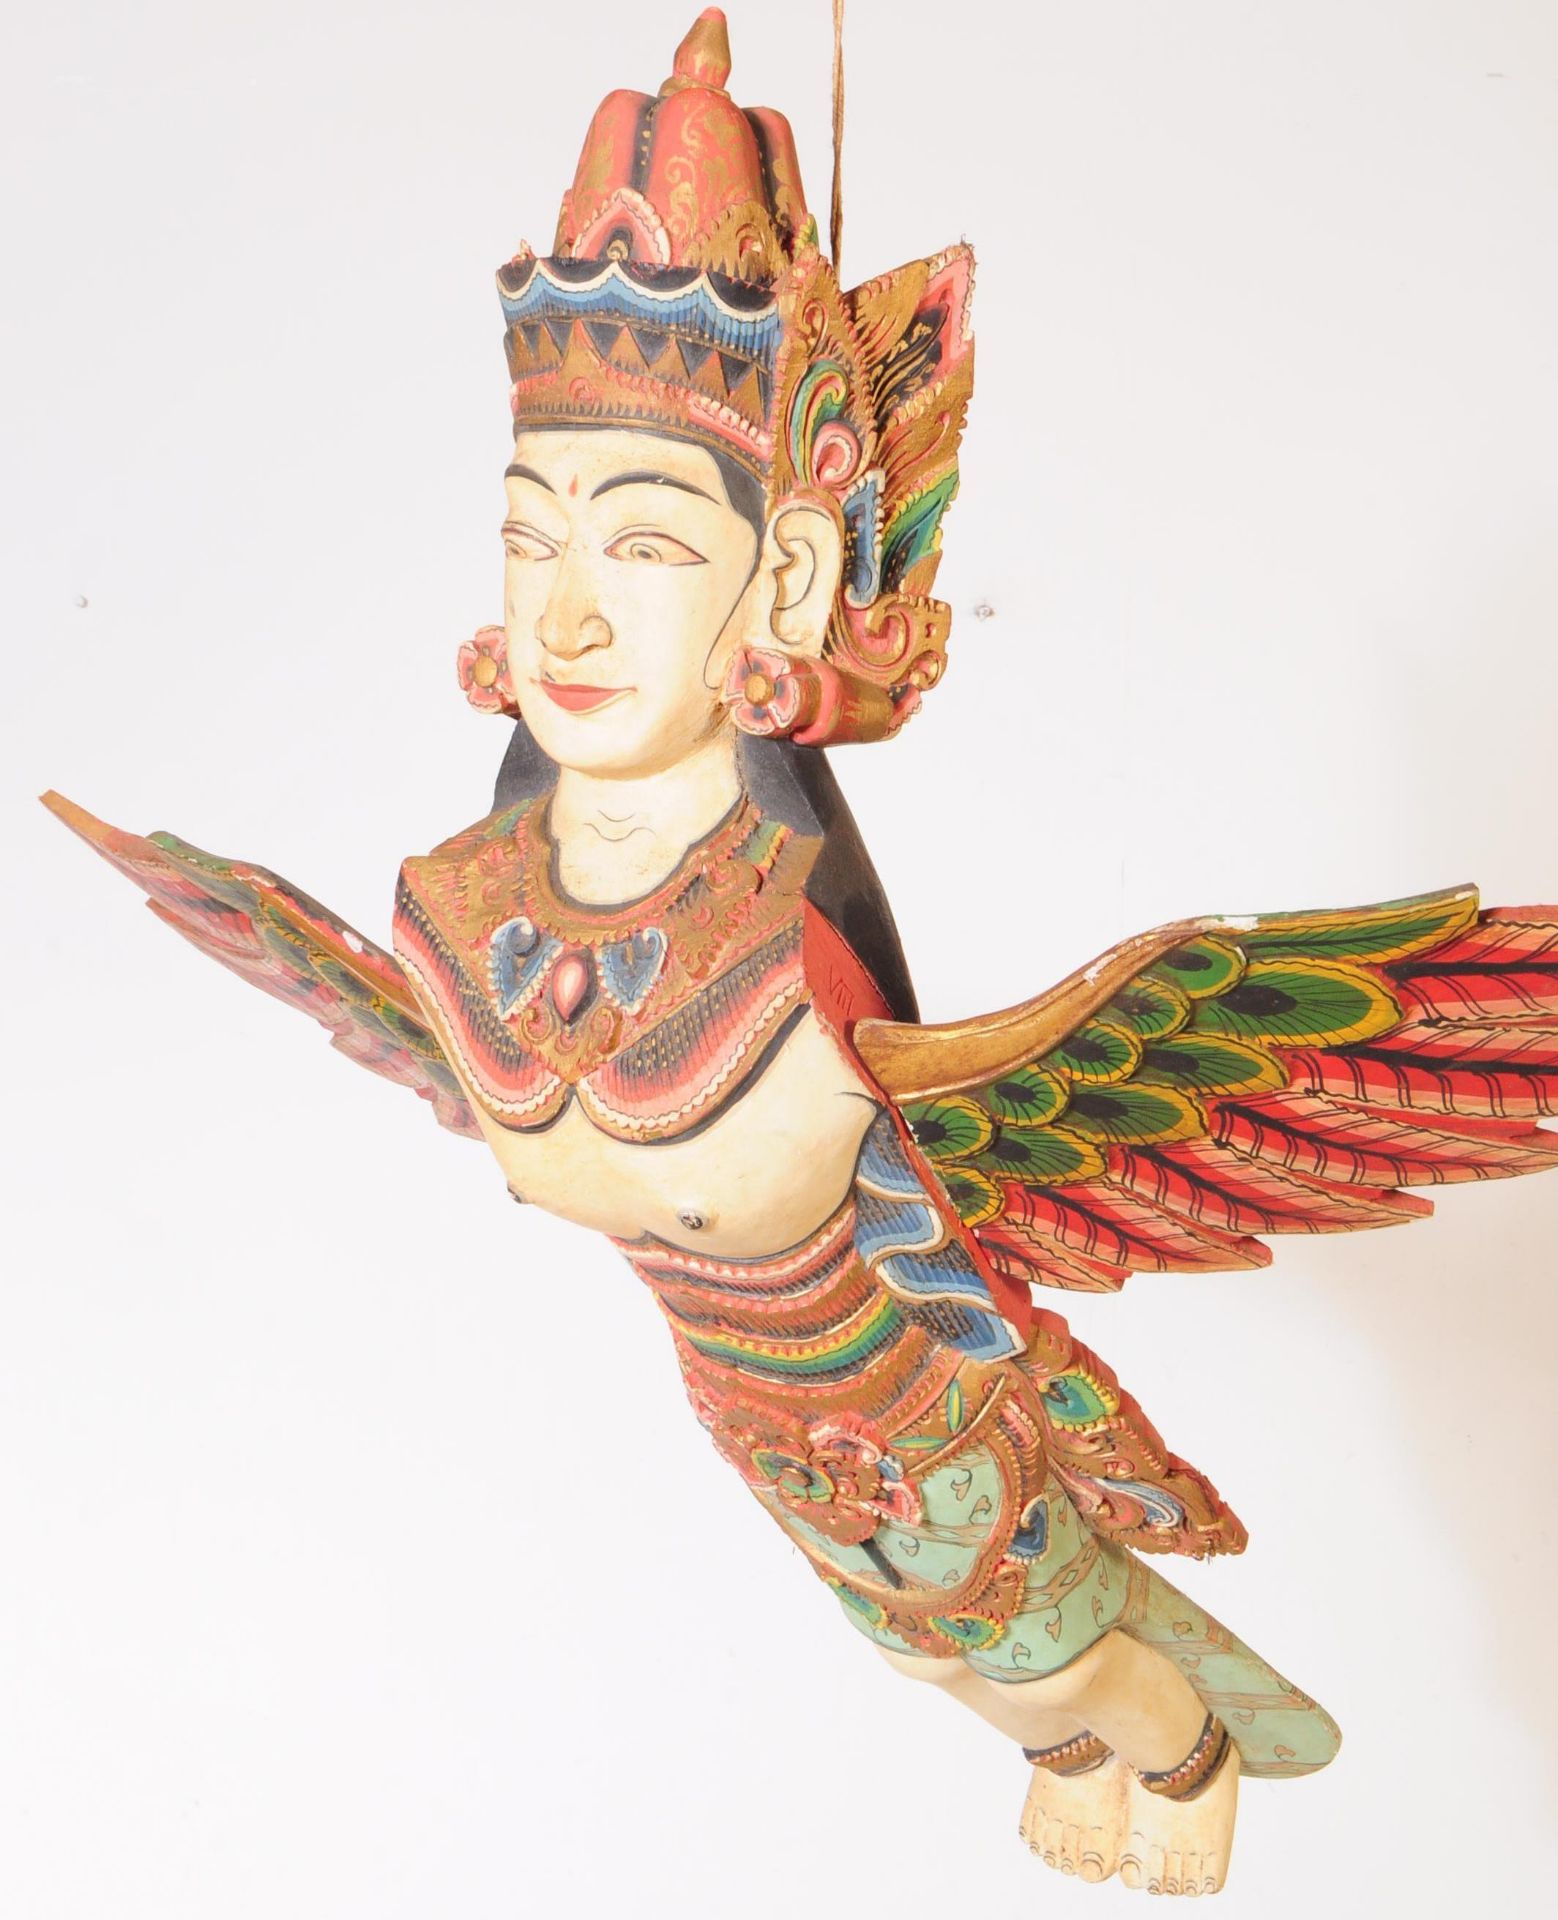 TWO MID 20TH CENTURY INDIAN AVIAN HUMANOIDS FLYING ORNAMENTS - Image 2 of 7